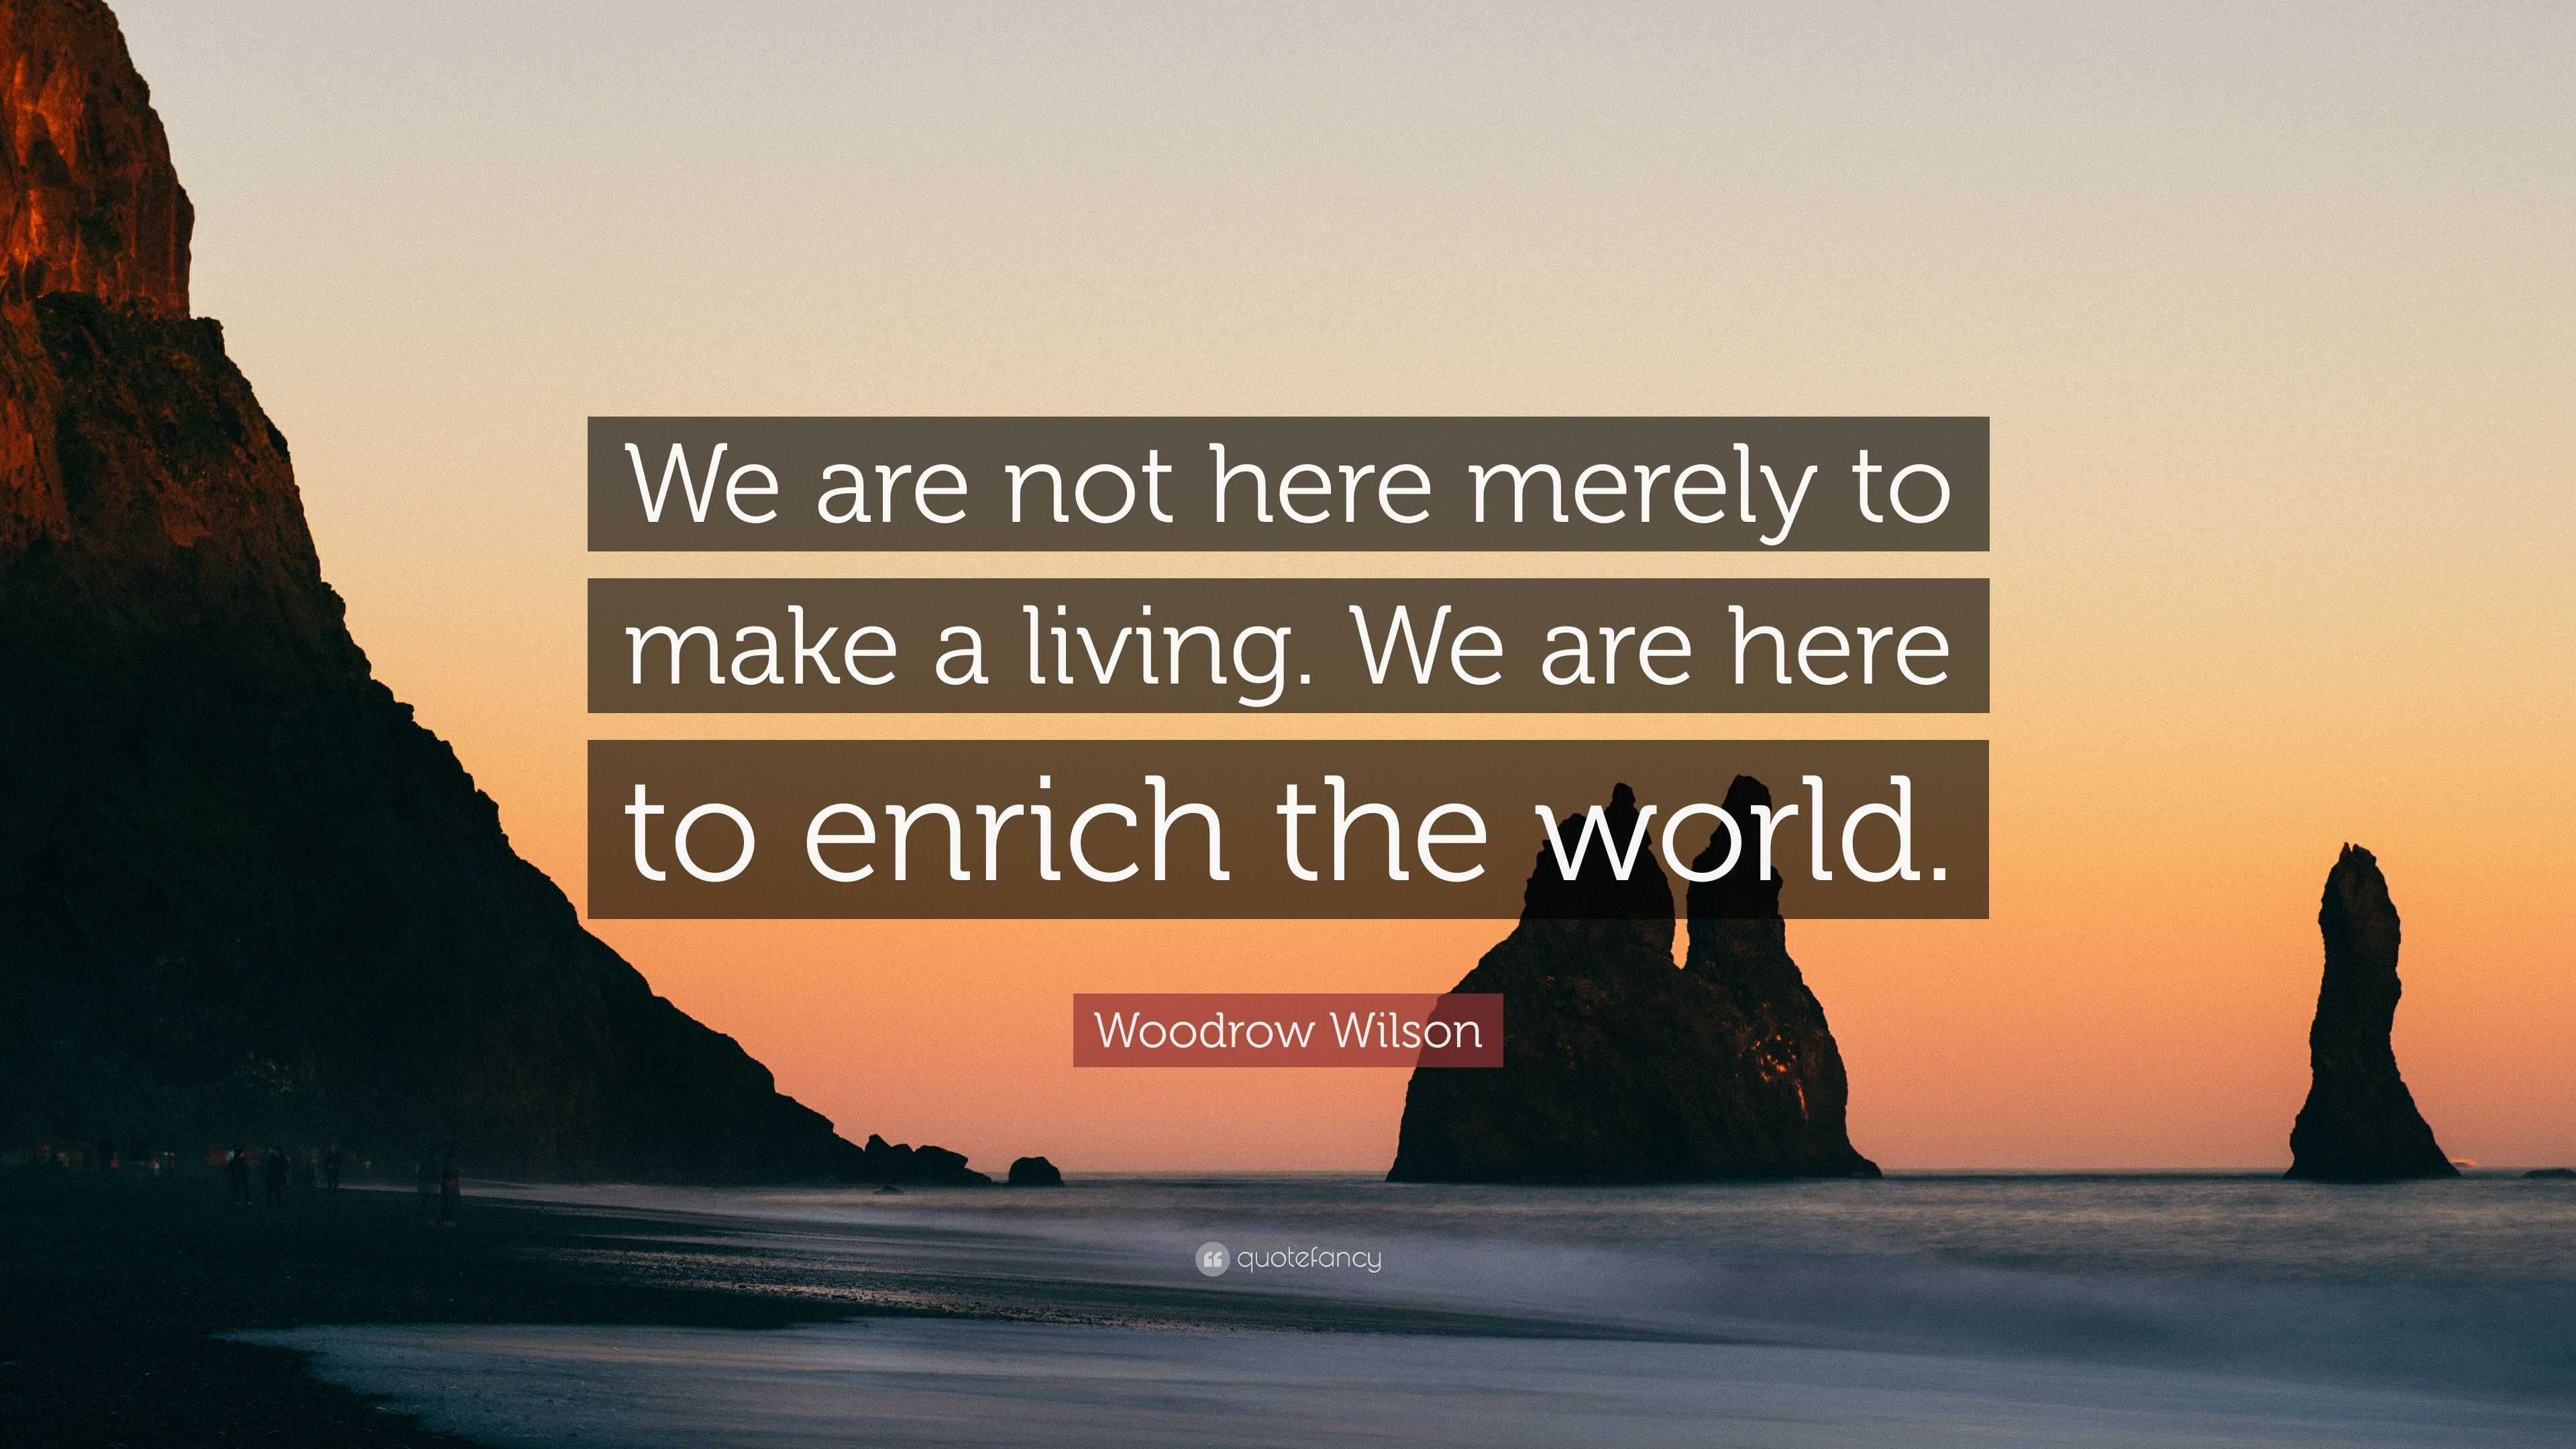 You are not here merely to make a living.